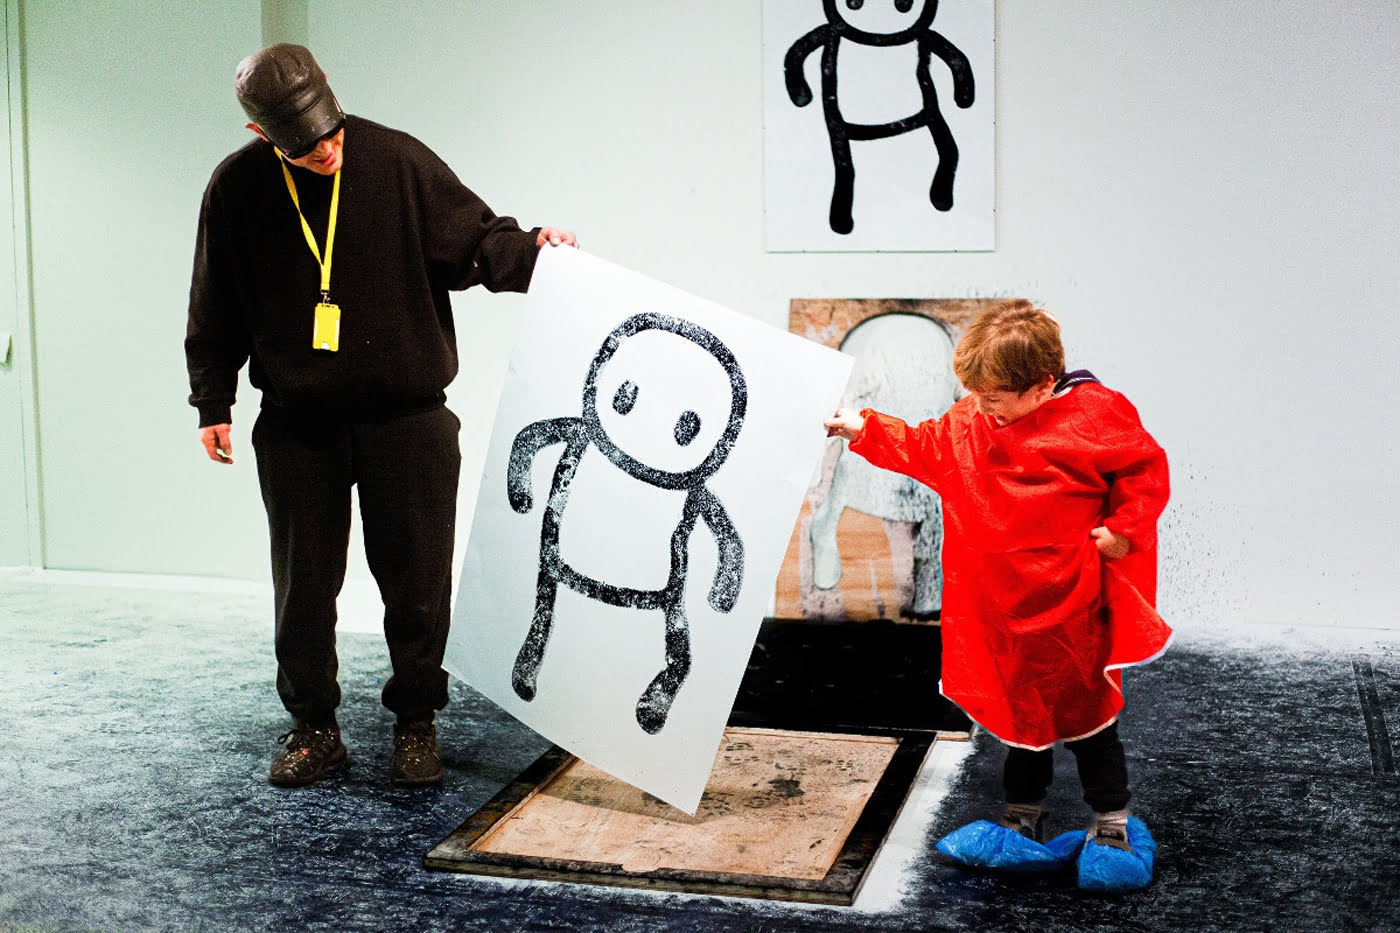 STIK and the Southbank Centre join forces to raise funds for Imagine Children's Festival